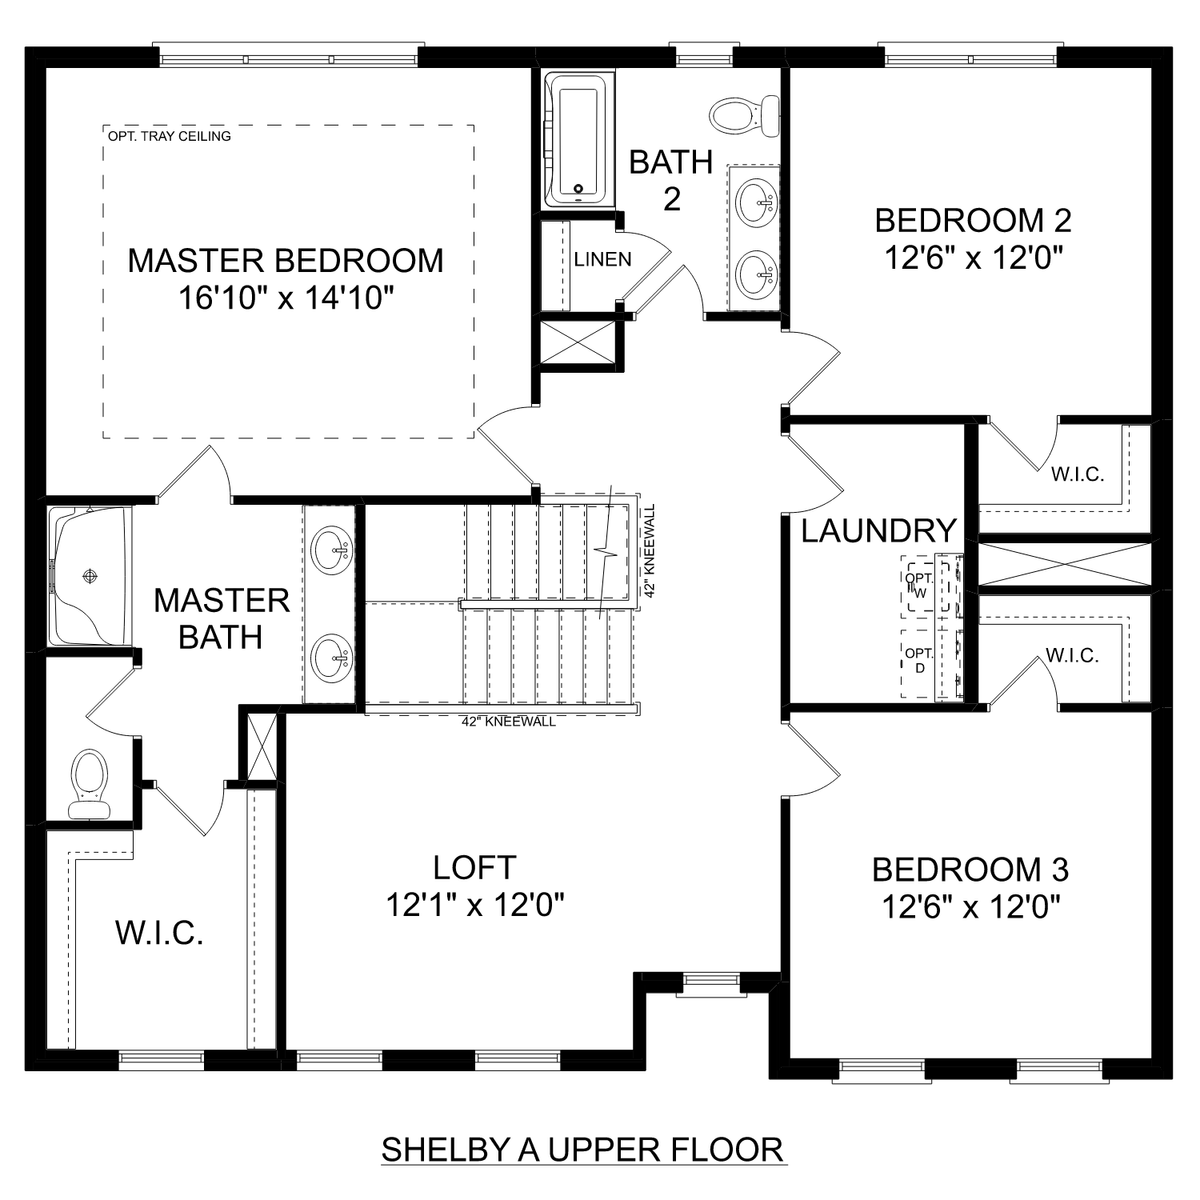 2 - The Shelby A buildable floor plan layout in Davidson Homes' Monteagle Cove community.